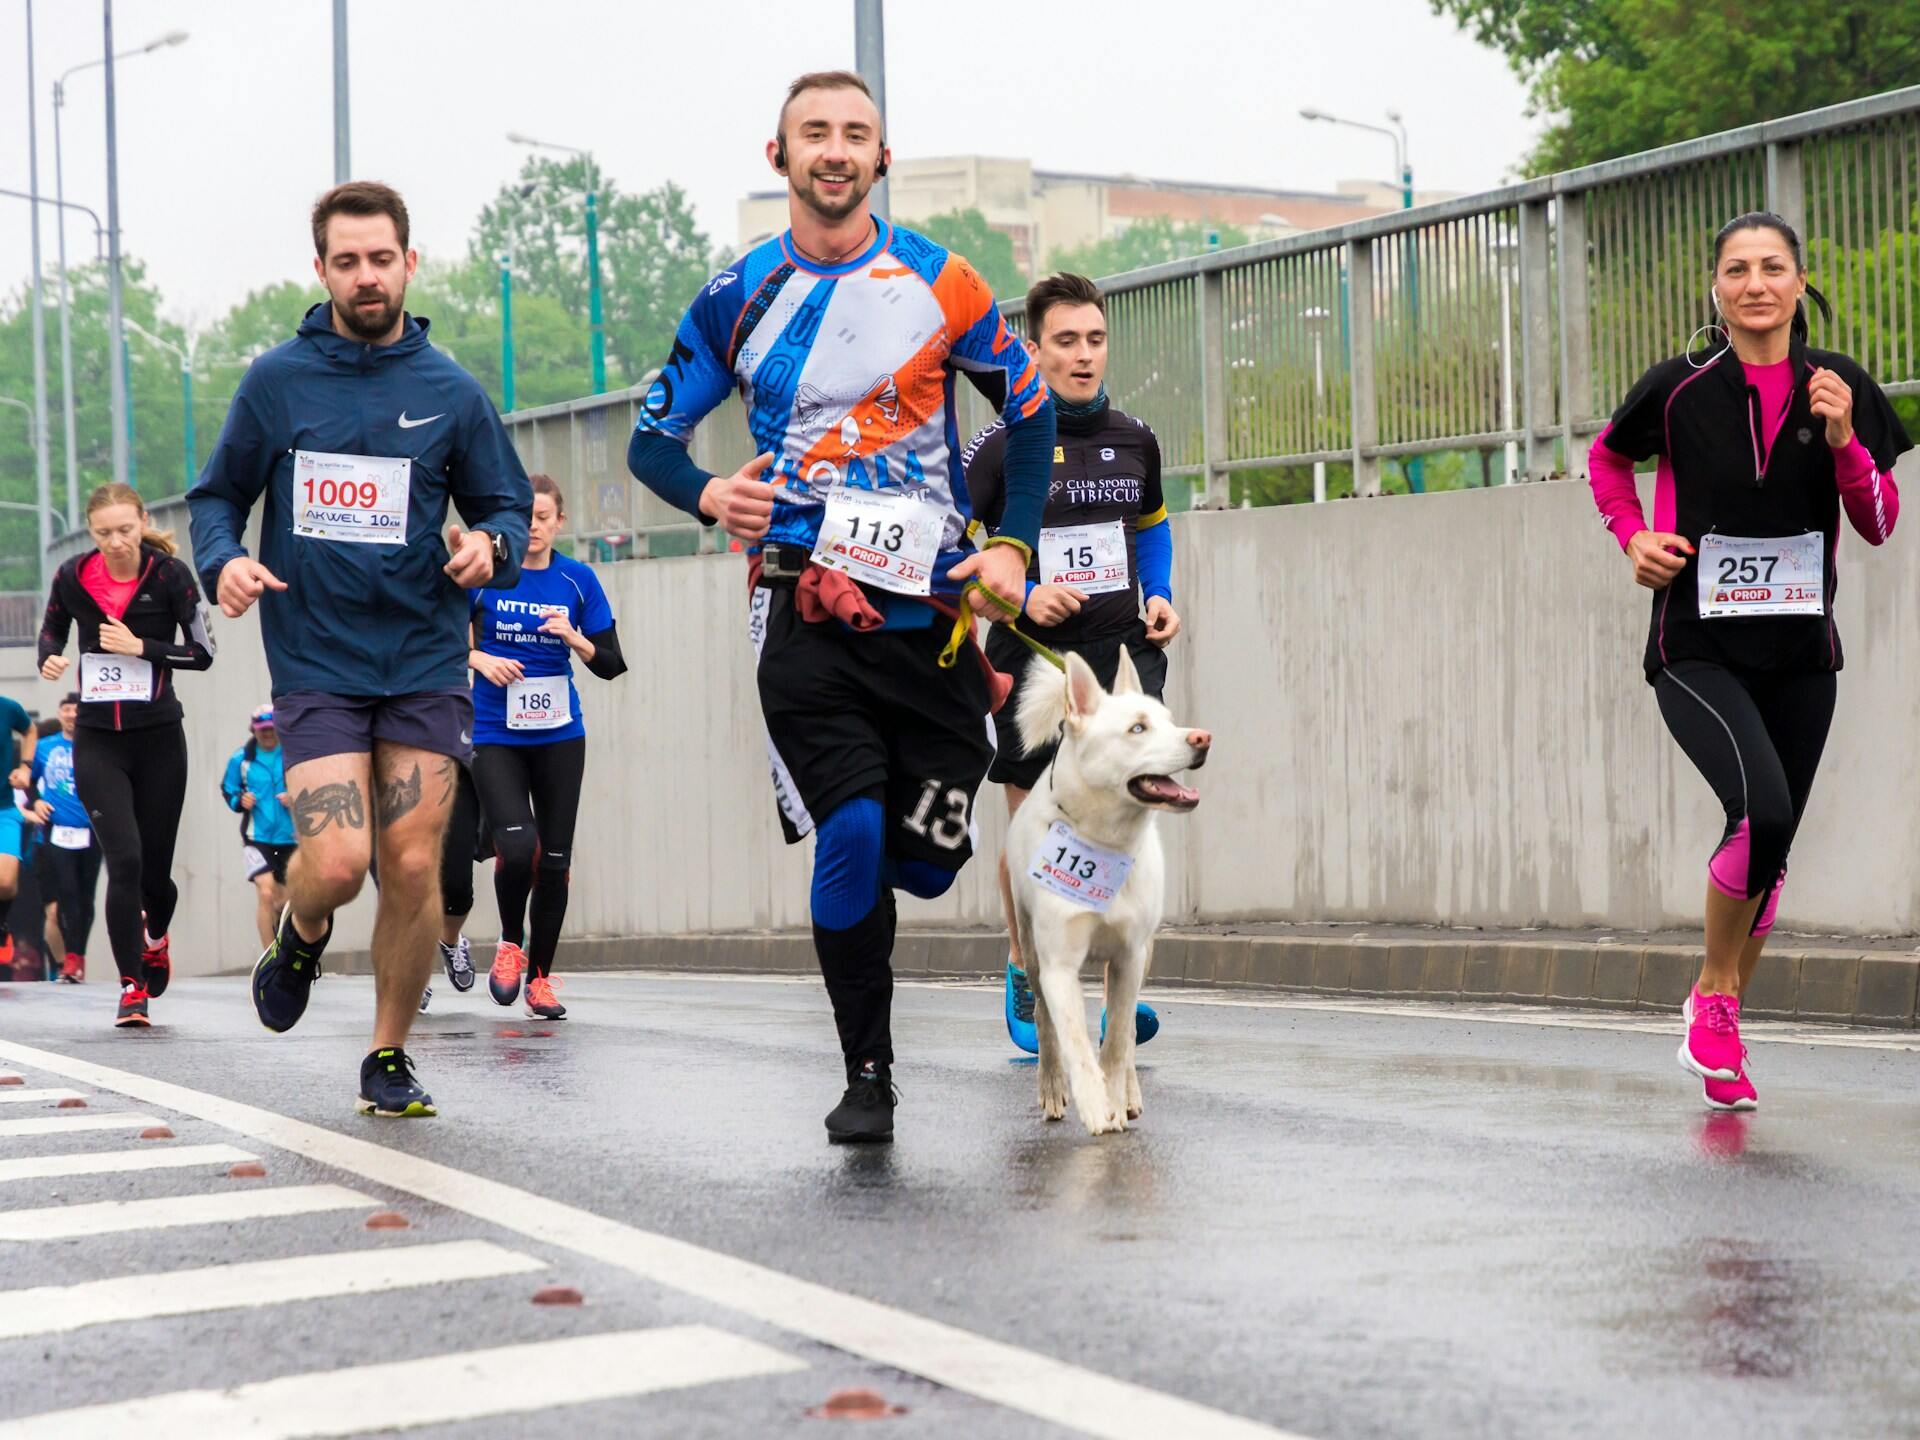 A group of marathon runners jogging down a street along with a dog